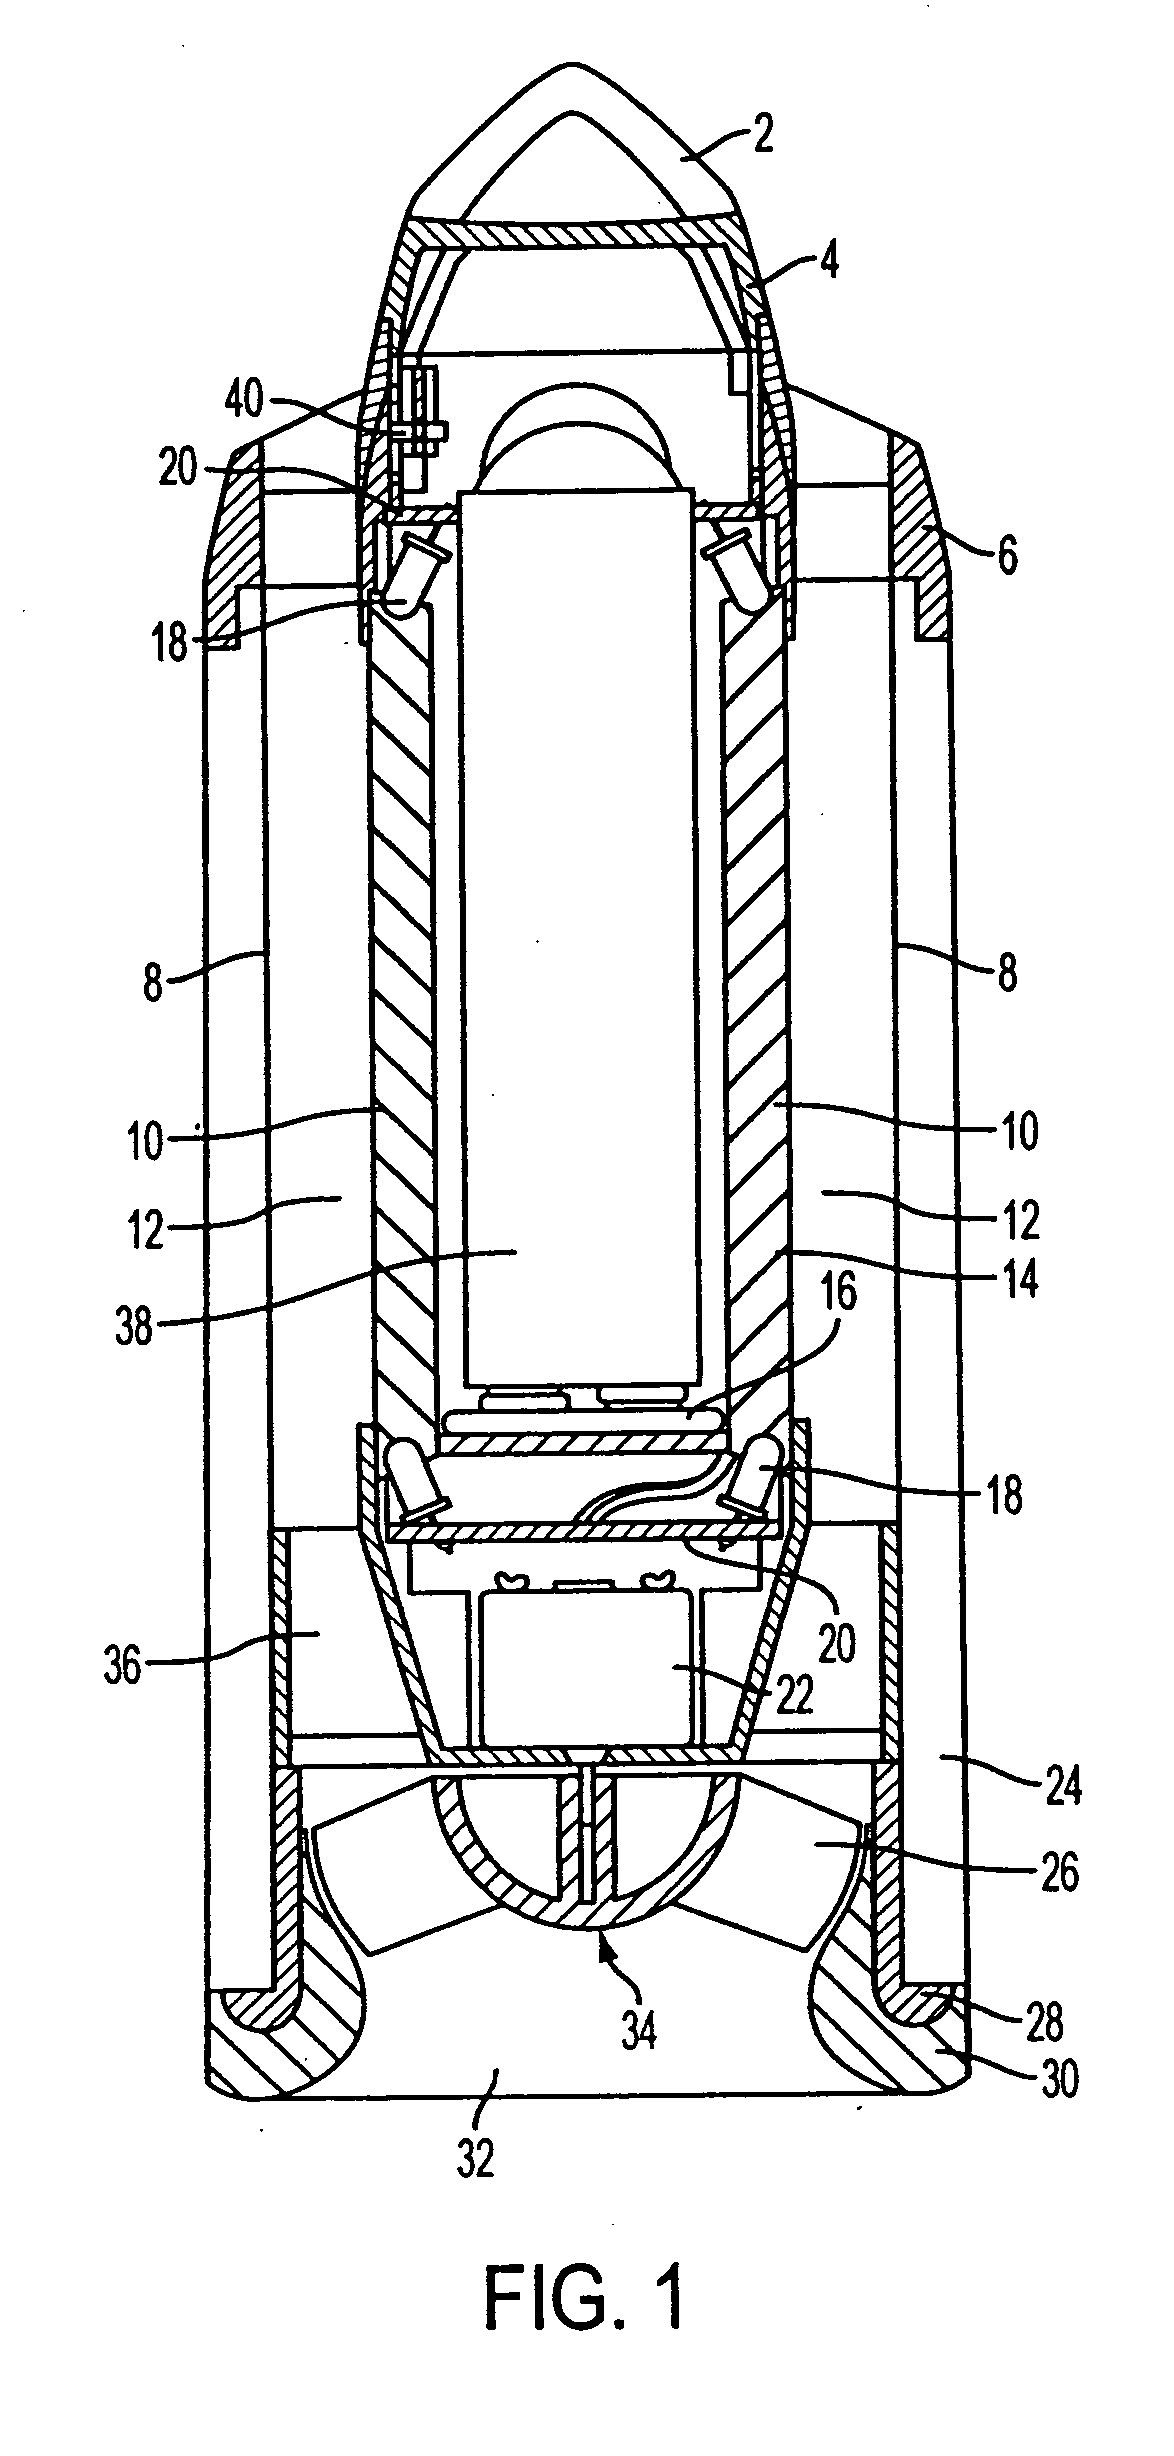 Device capable of removing contaminants from a fluid